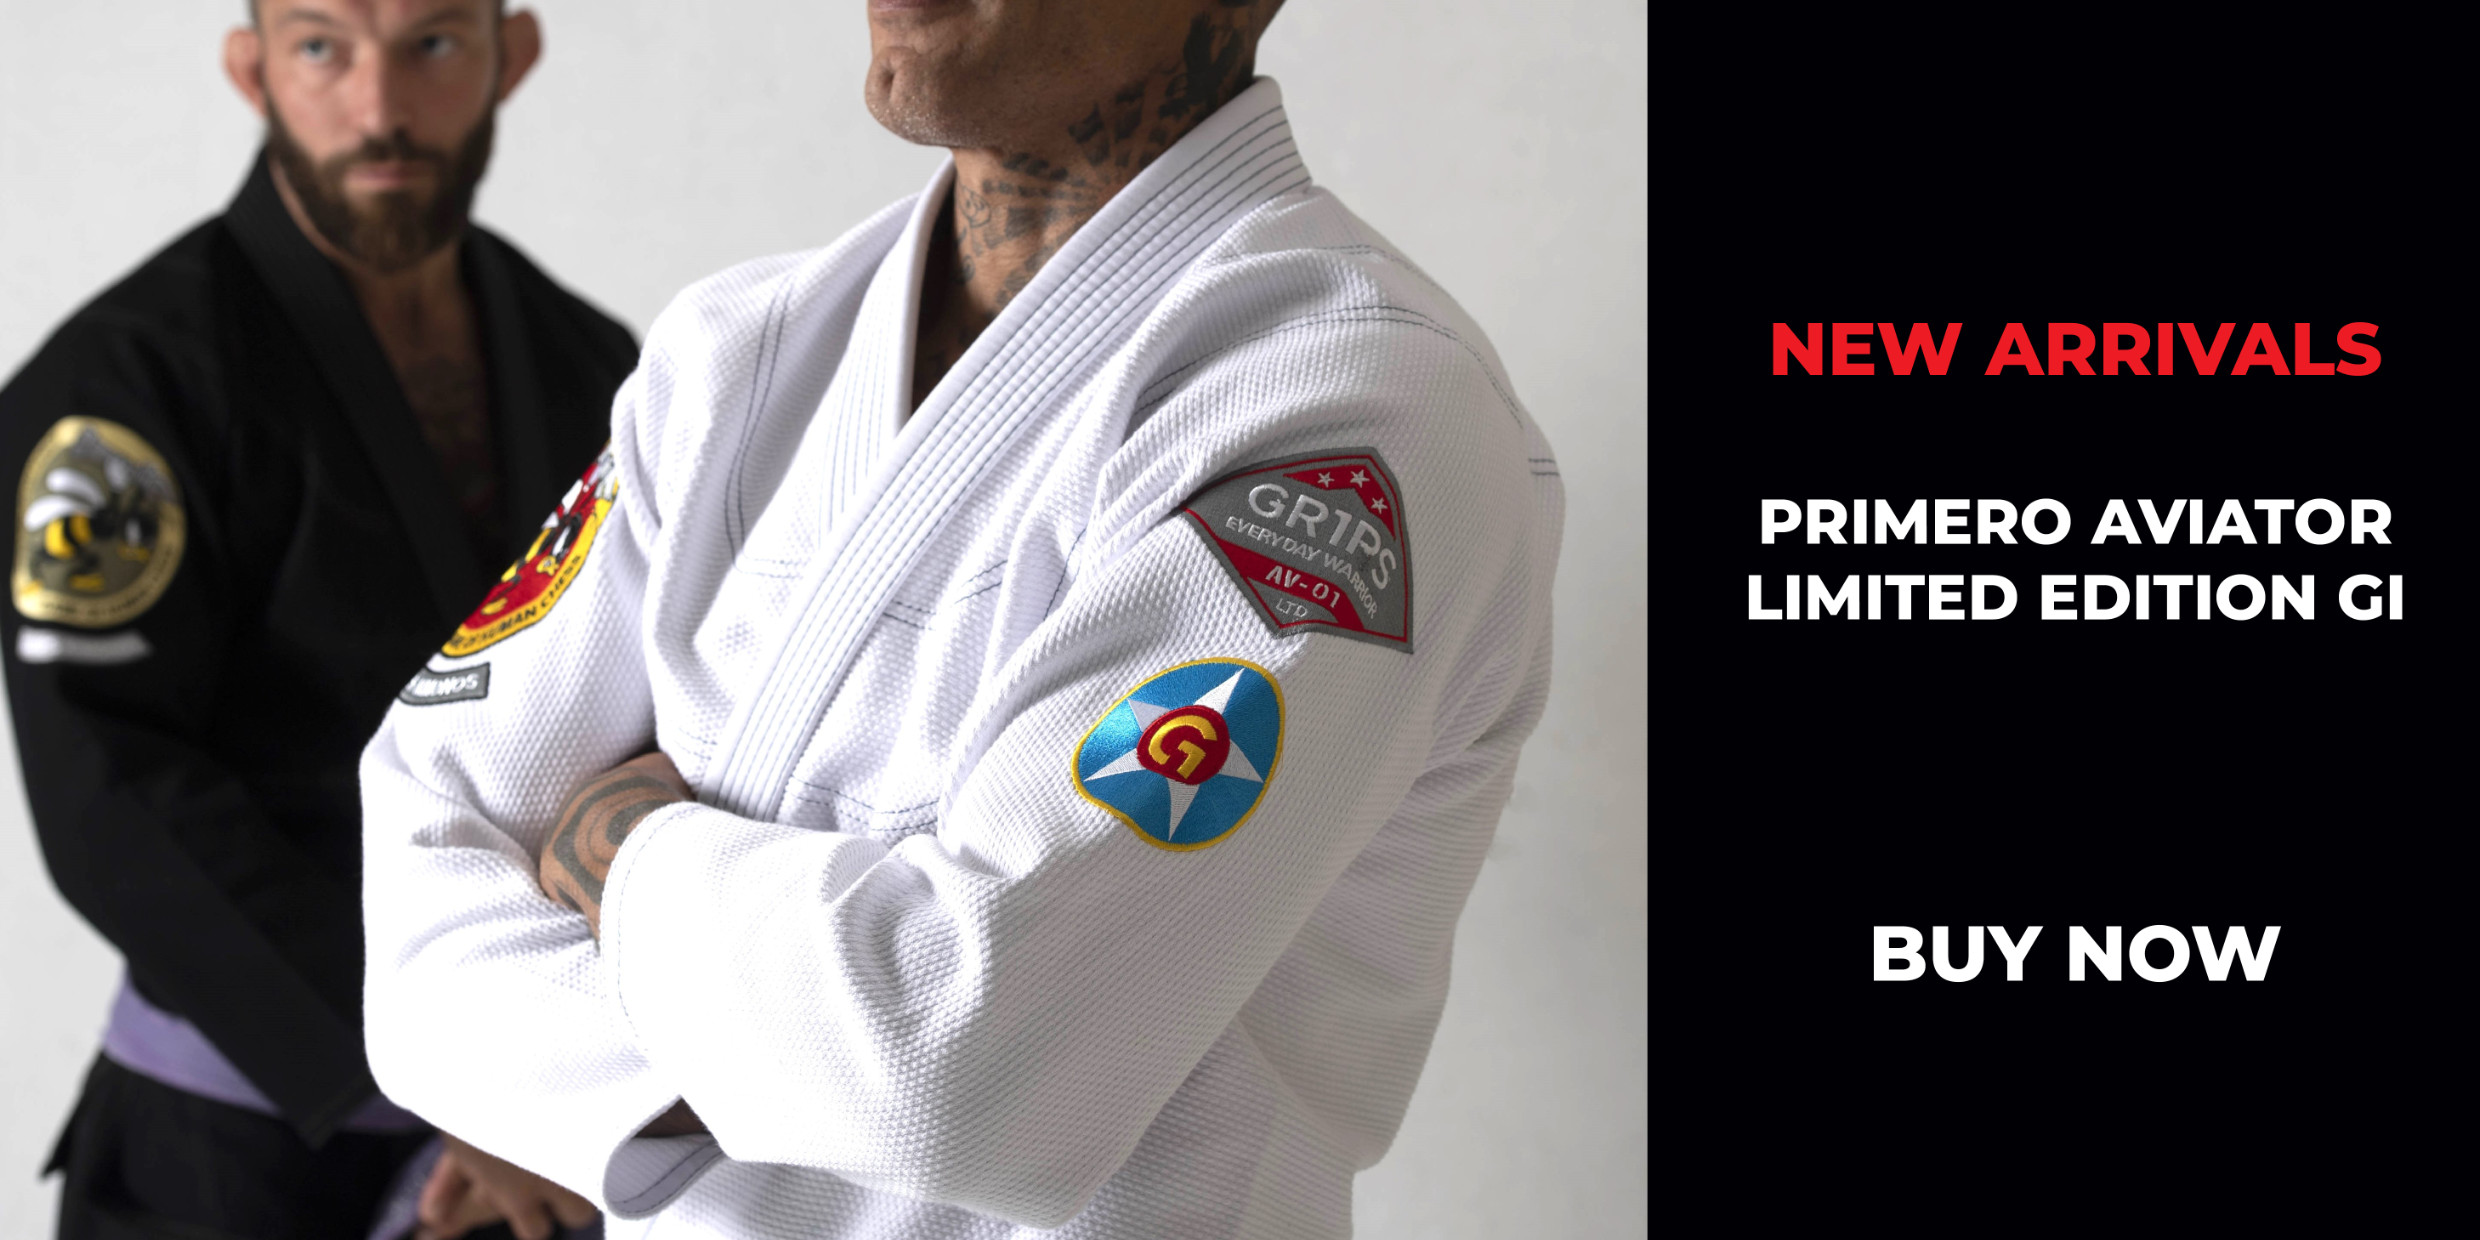 Gr1ps BJJ Clothing Official Store